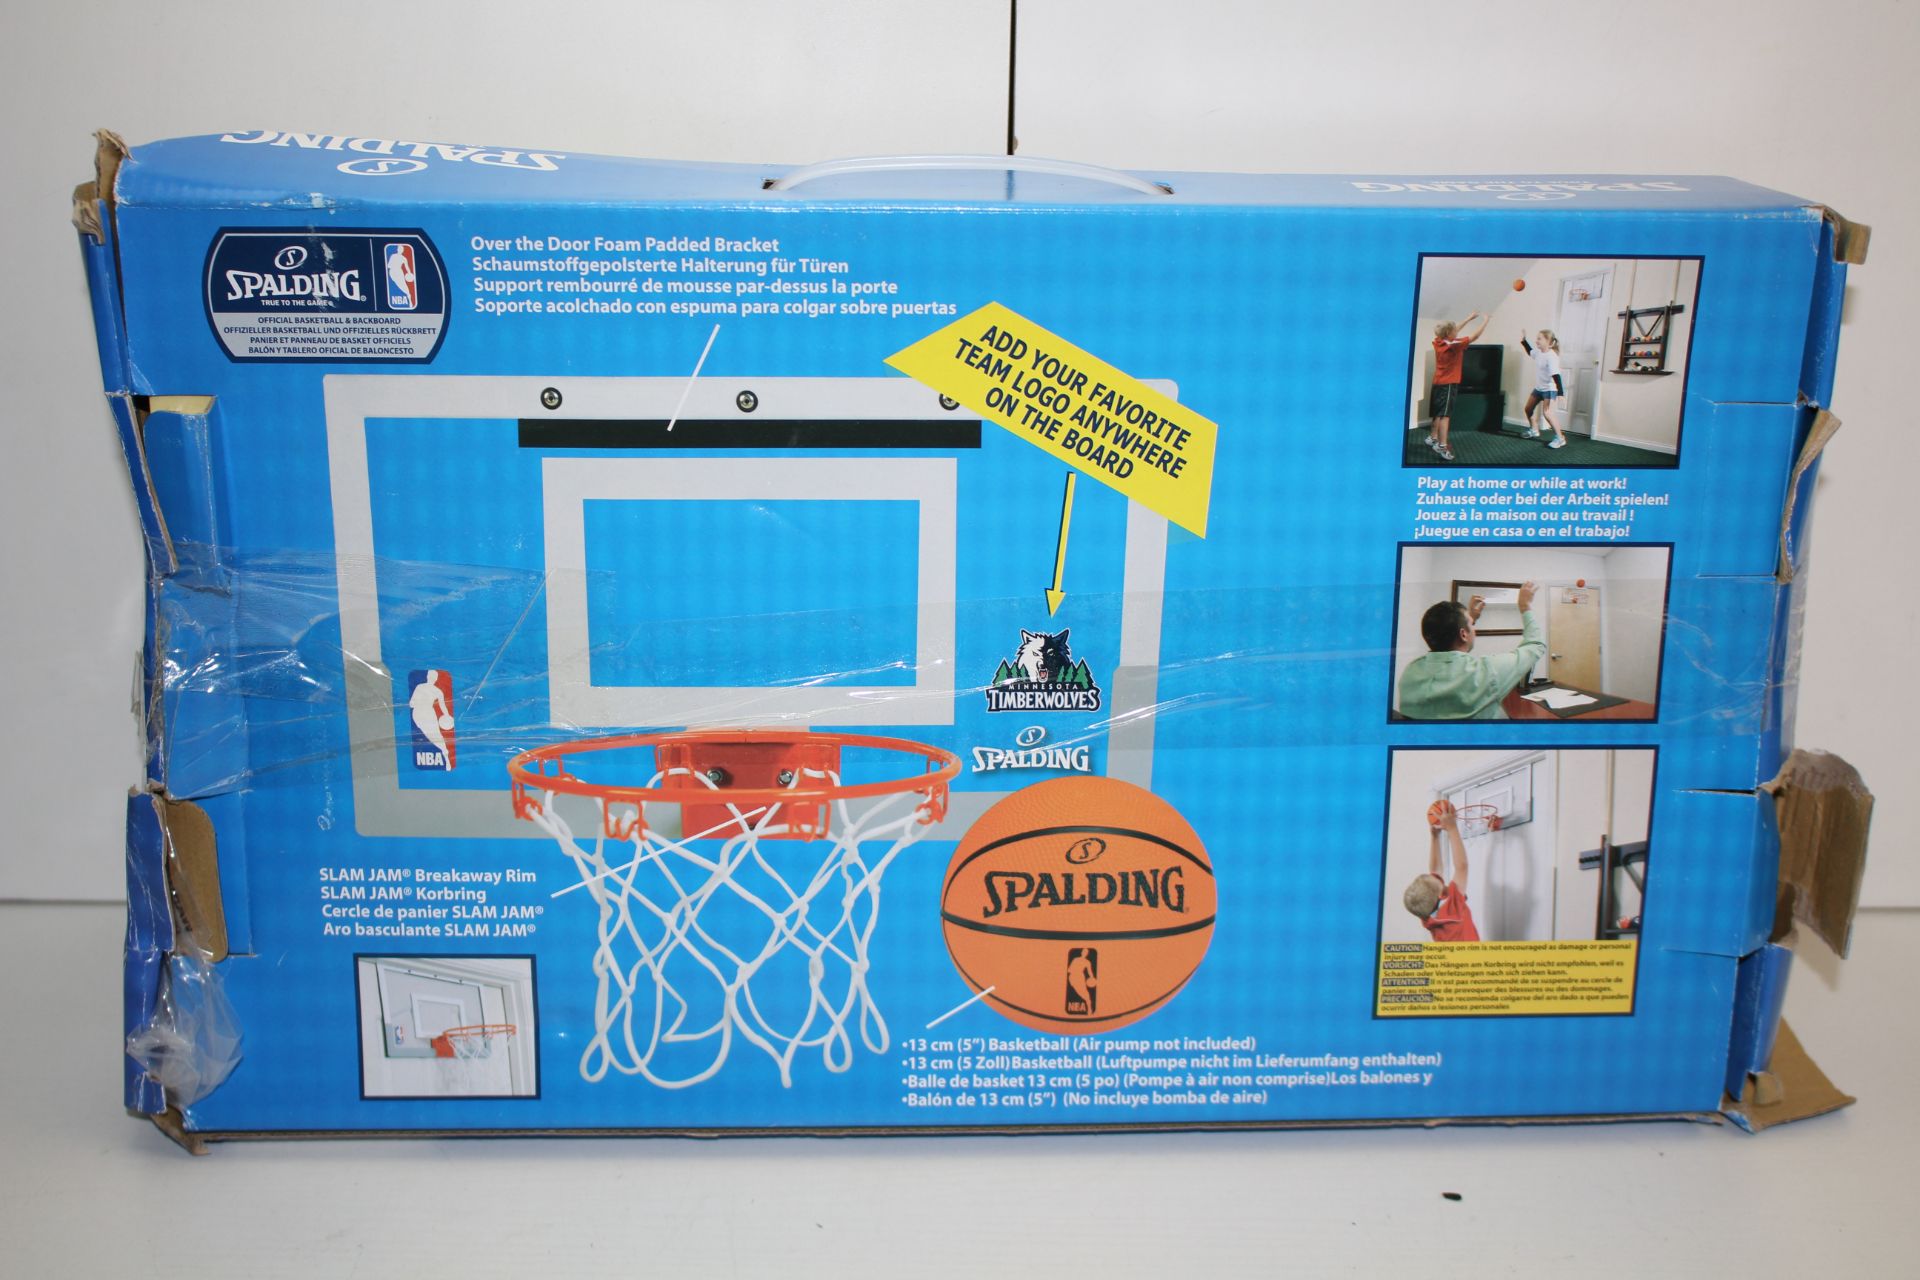 BOXED SPALDING OVER THE DOOR FOAM PADDED BASKET BALL BRACKET Condition ReportAppraisal Available